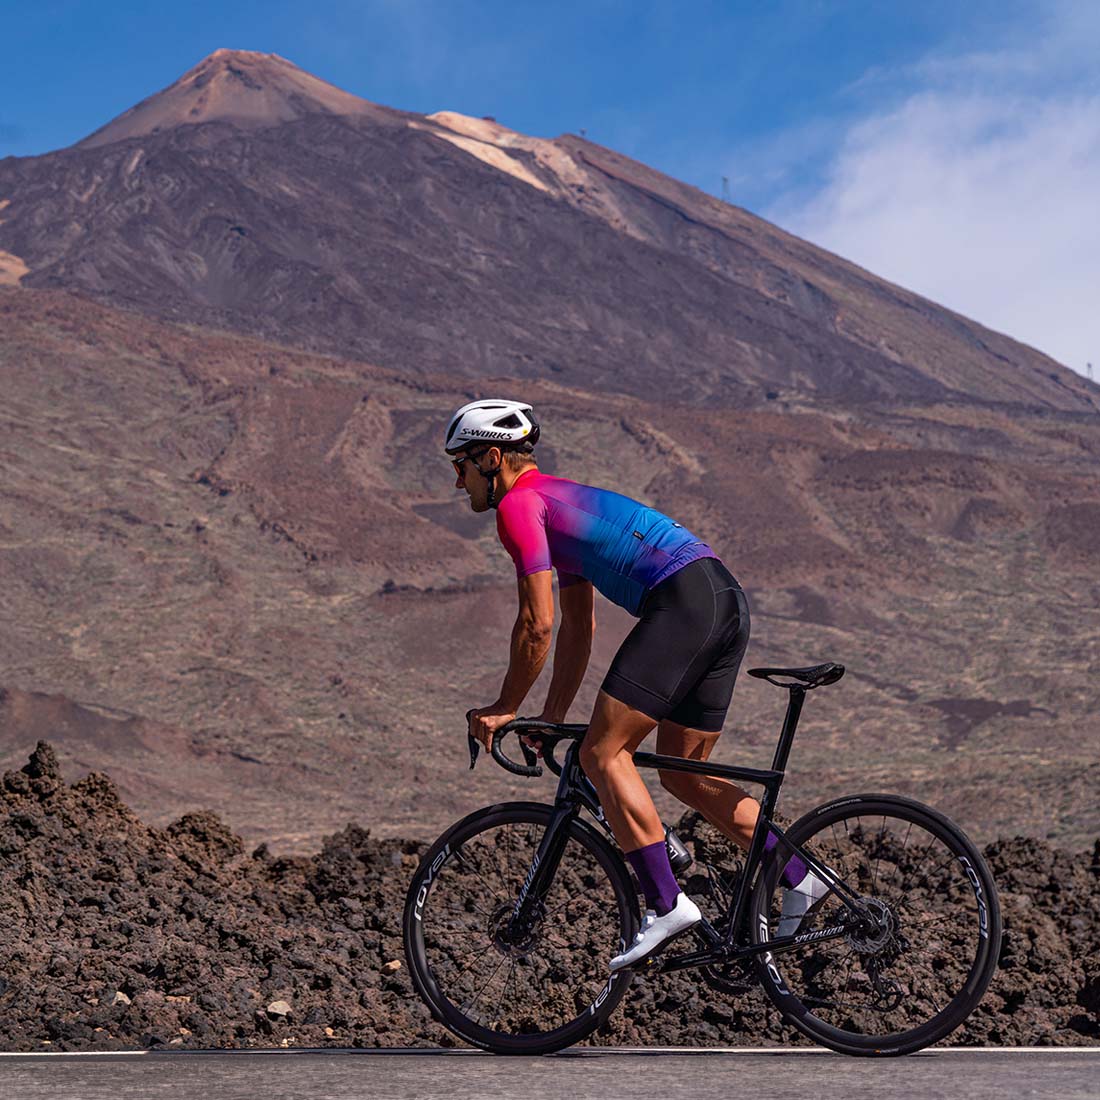 pink and blue ombre cycling kit and Teide in the backgroud